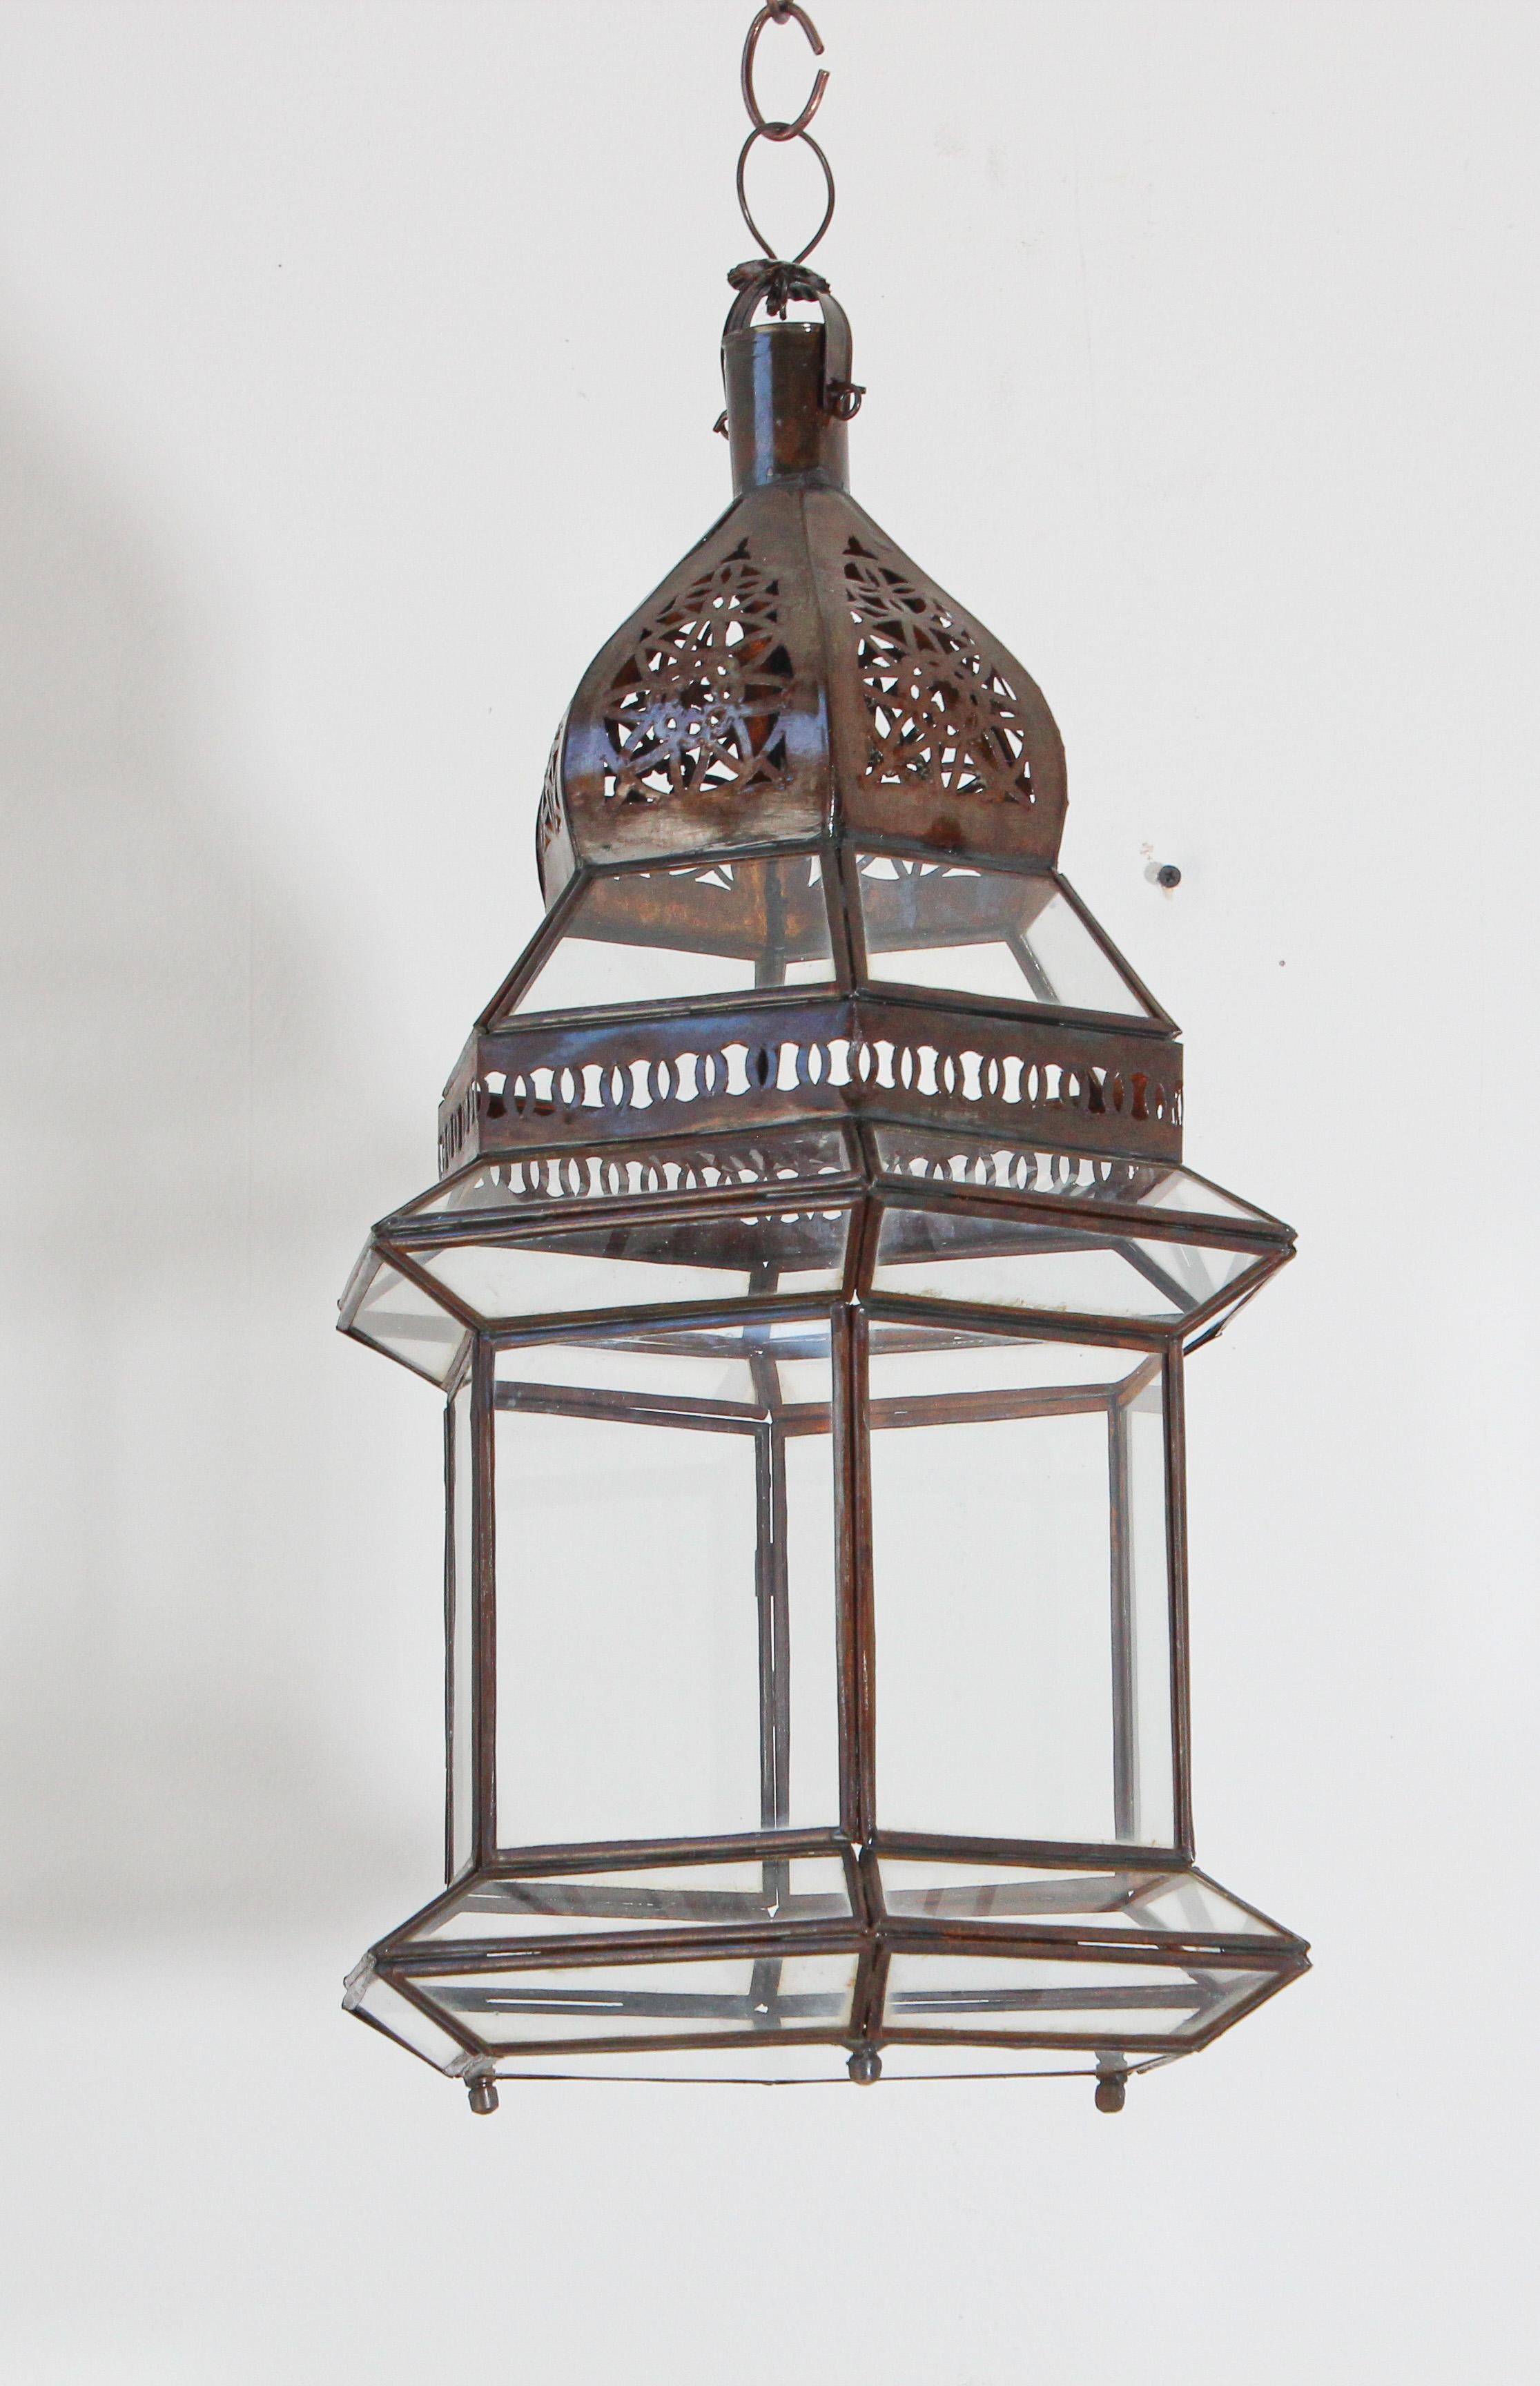 Hand-Crafted Handcrafted Moroccan Hanging Glass Lantern